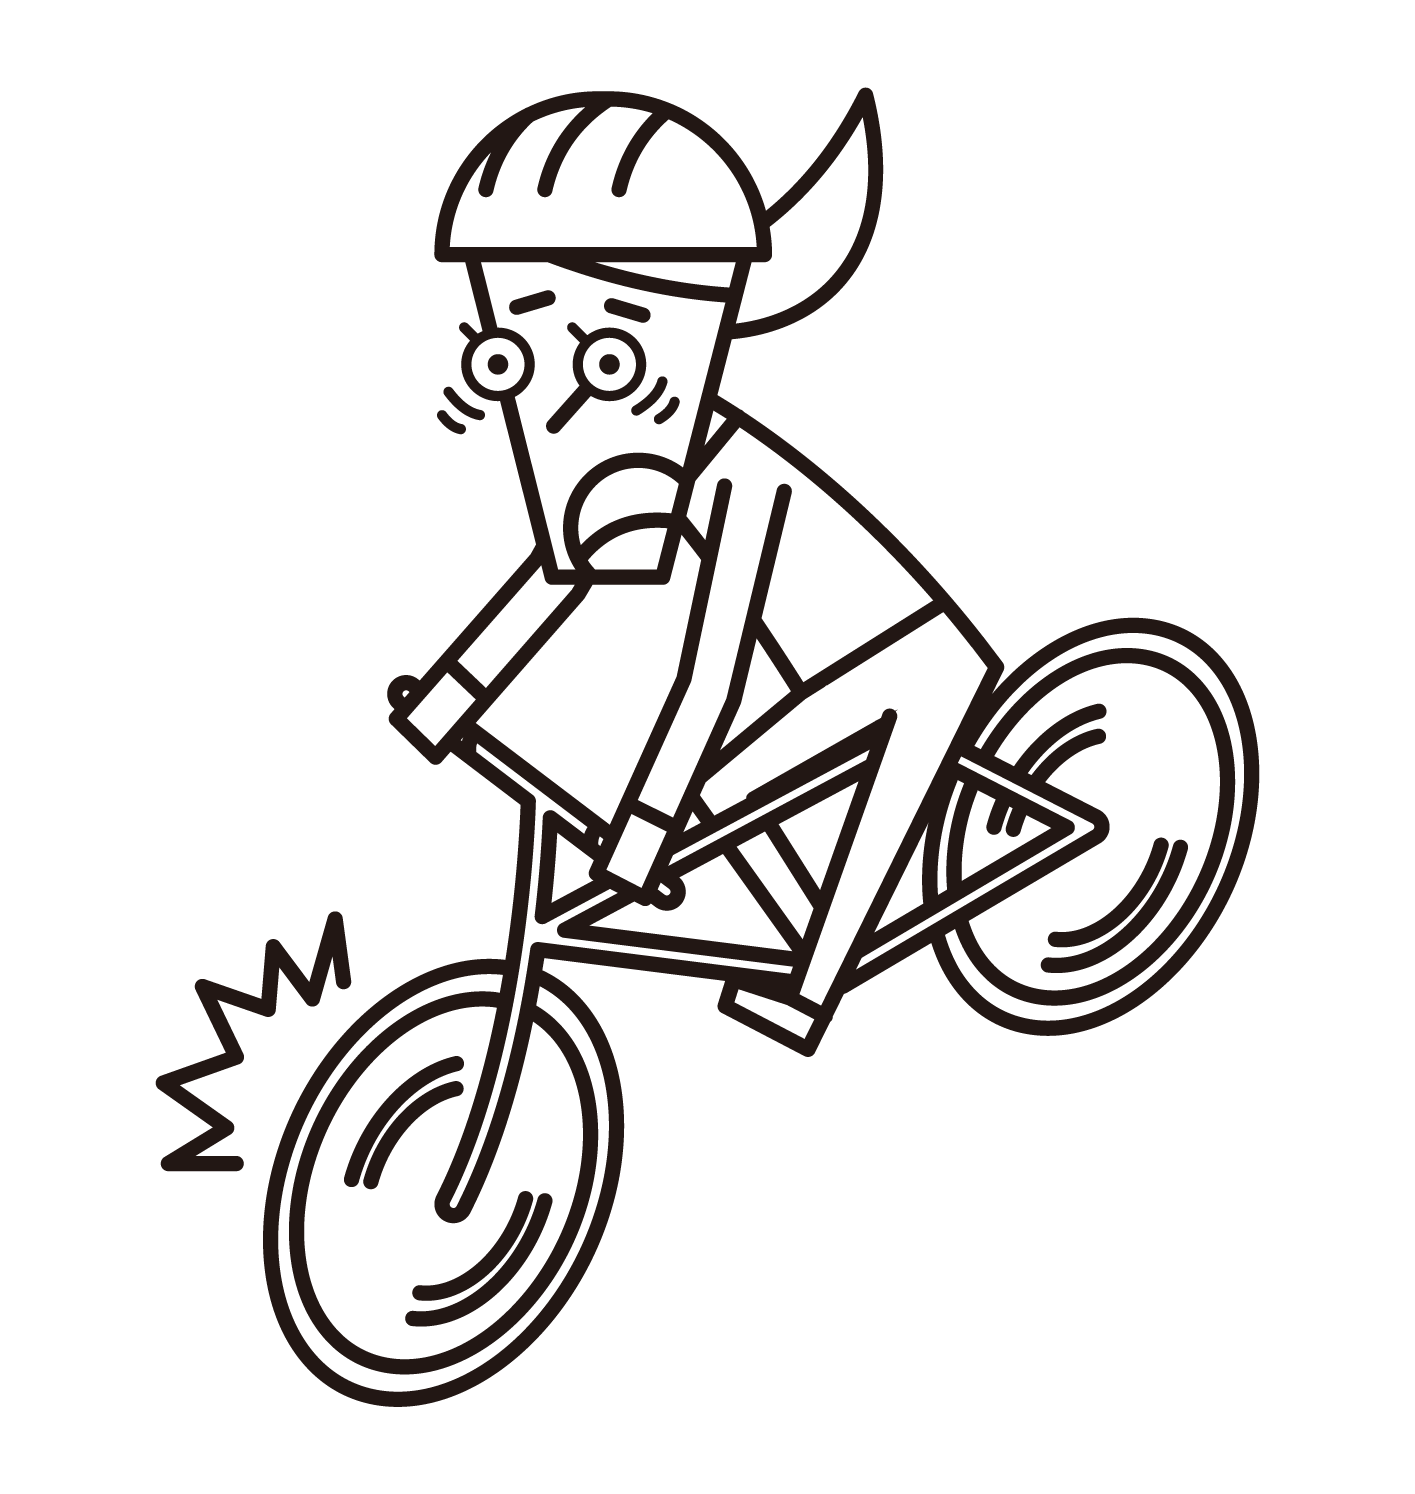 Illustration of a cyclist (woman) who brakes suddenly